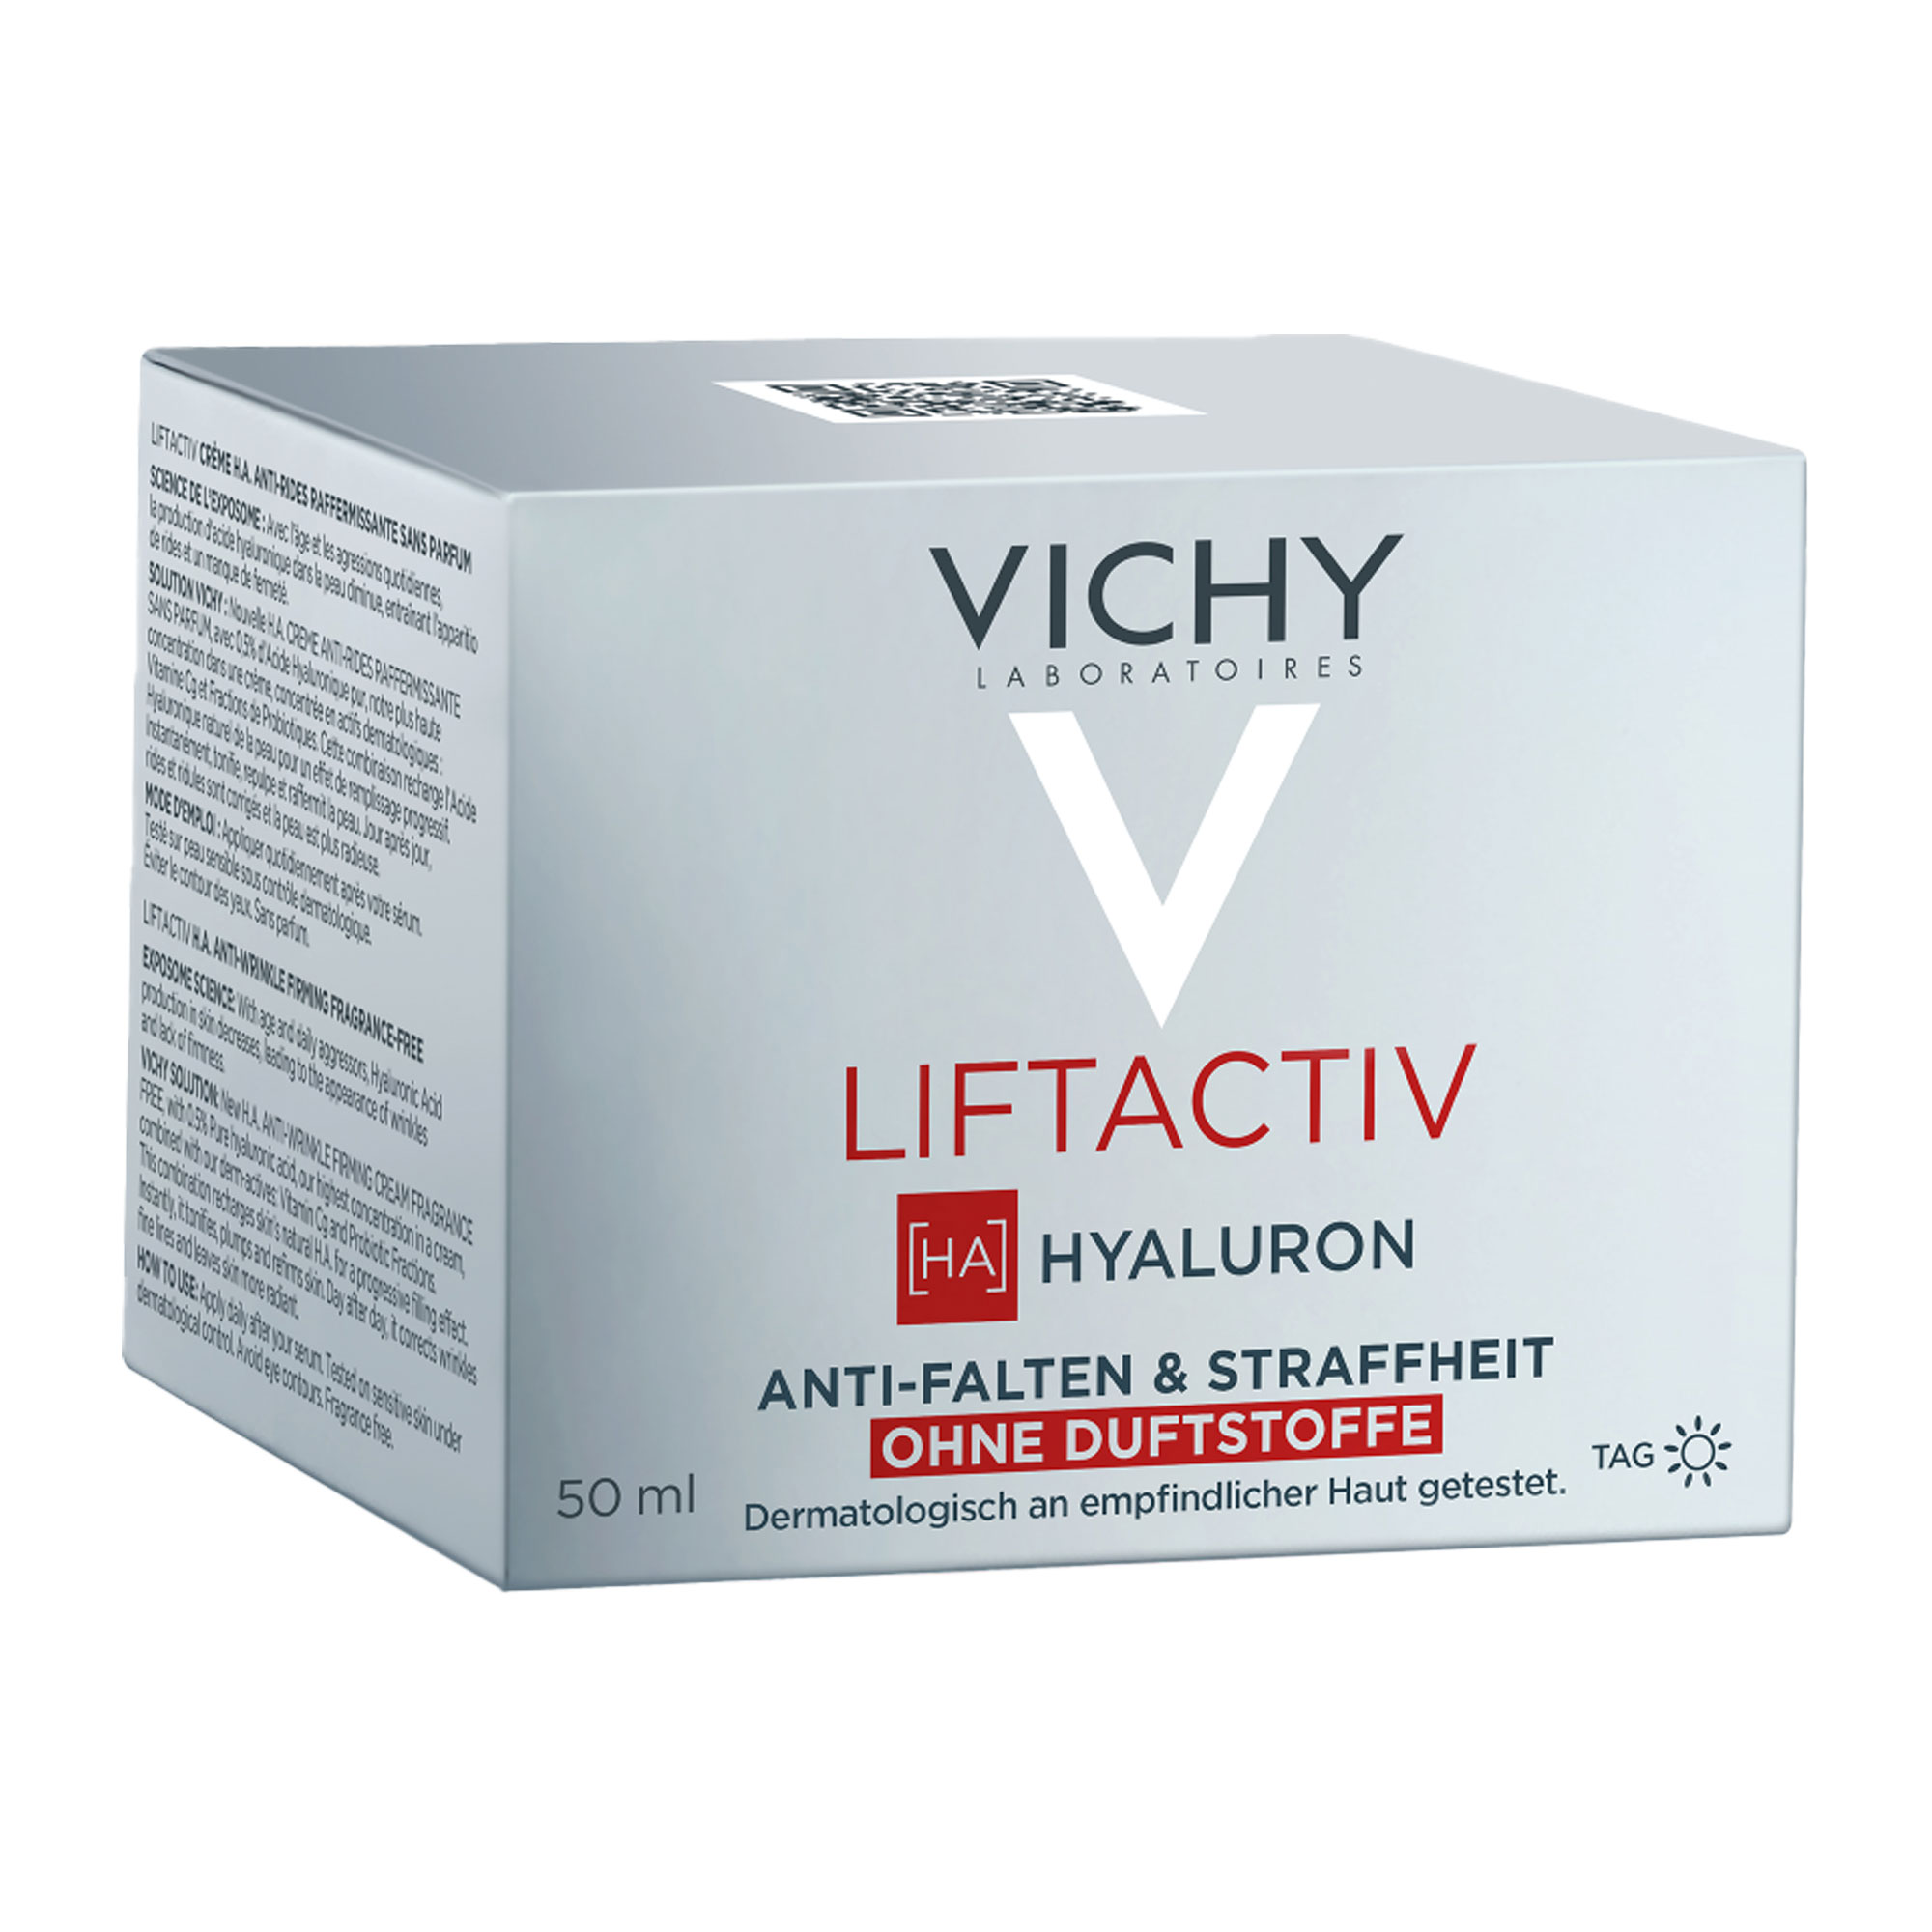 Vichy Liftactiv Hyaluron Creme ohne Duftstoffe Verpackung